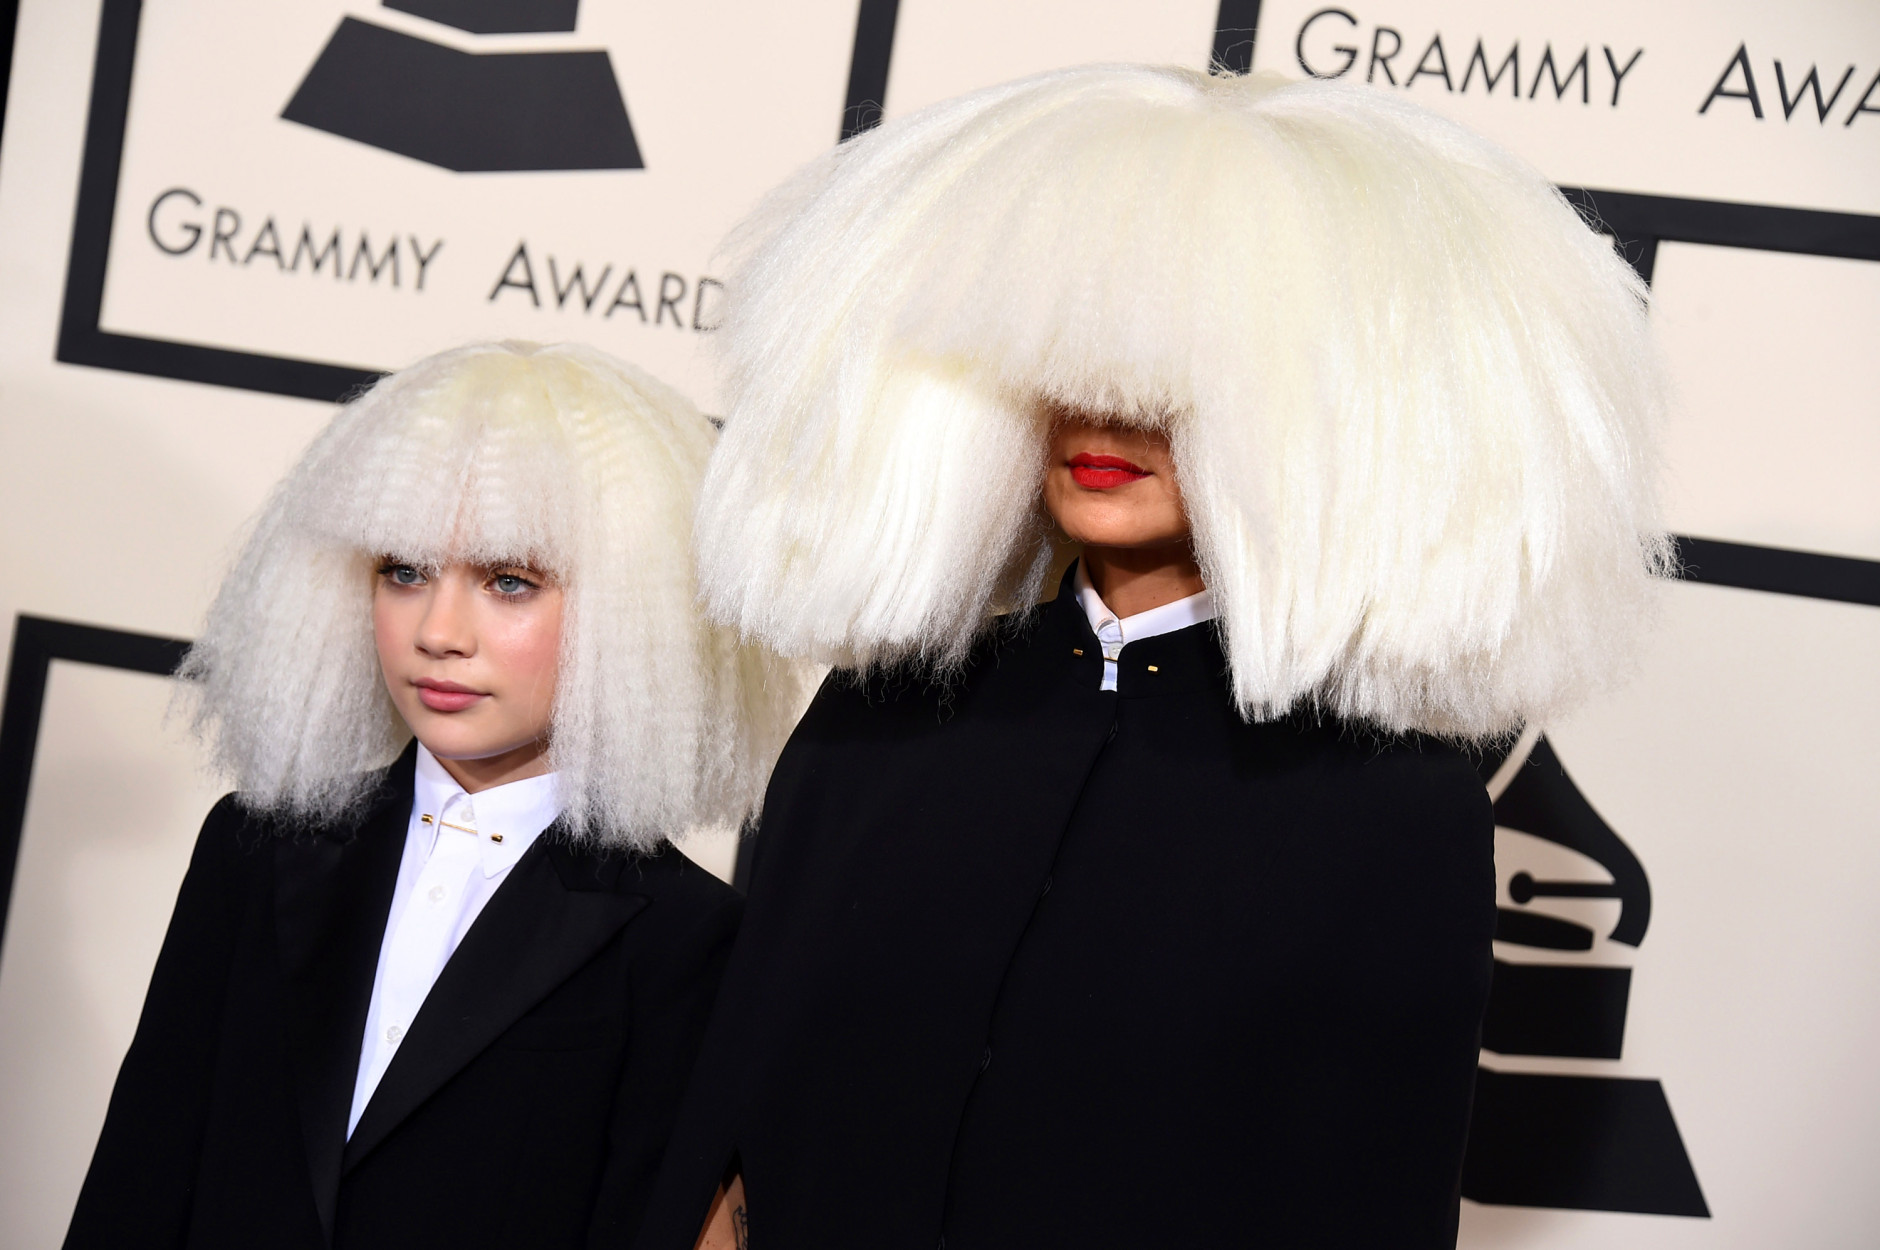 Sia, right, and Maddie Ziegler arrive at the 57th annual Grammy Awards at the Staples Center on Sunday, Feb. 8, 2015, in Los Angeles. (Photo by Jordan Strauss/Invision/AP)